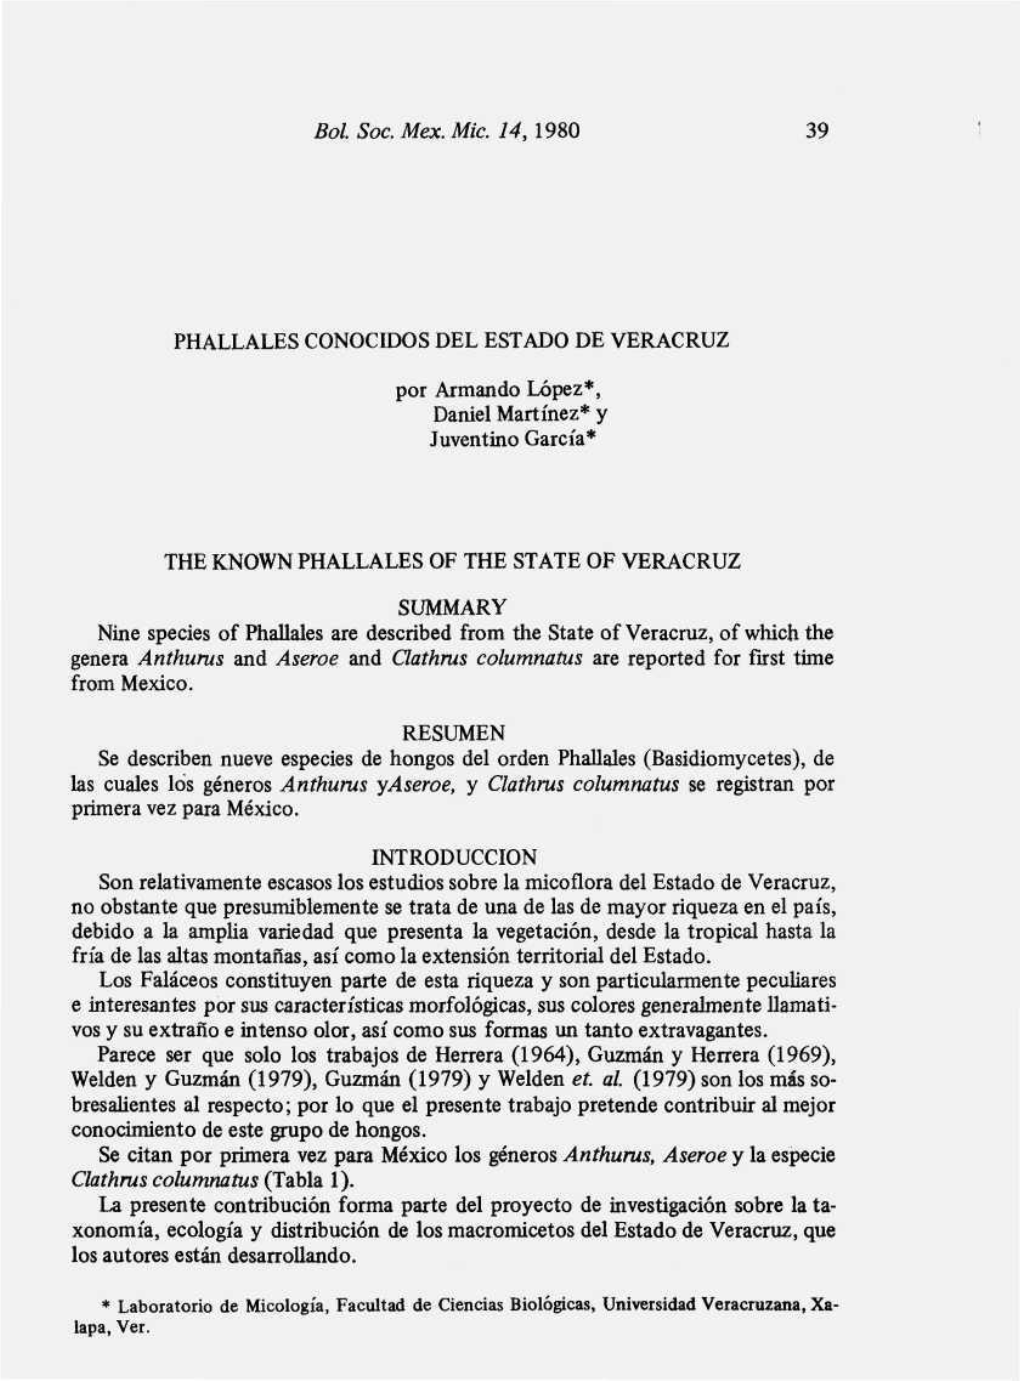 The Known Phallales of the State of Veracruz Summary